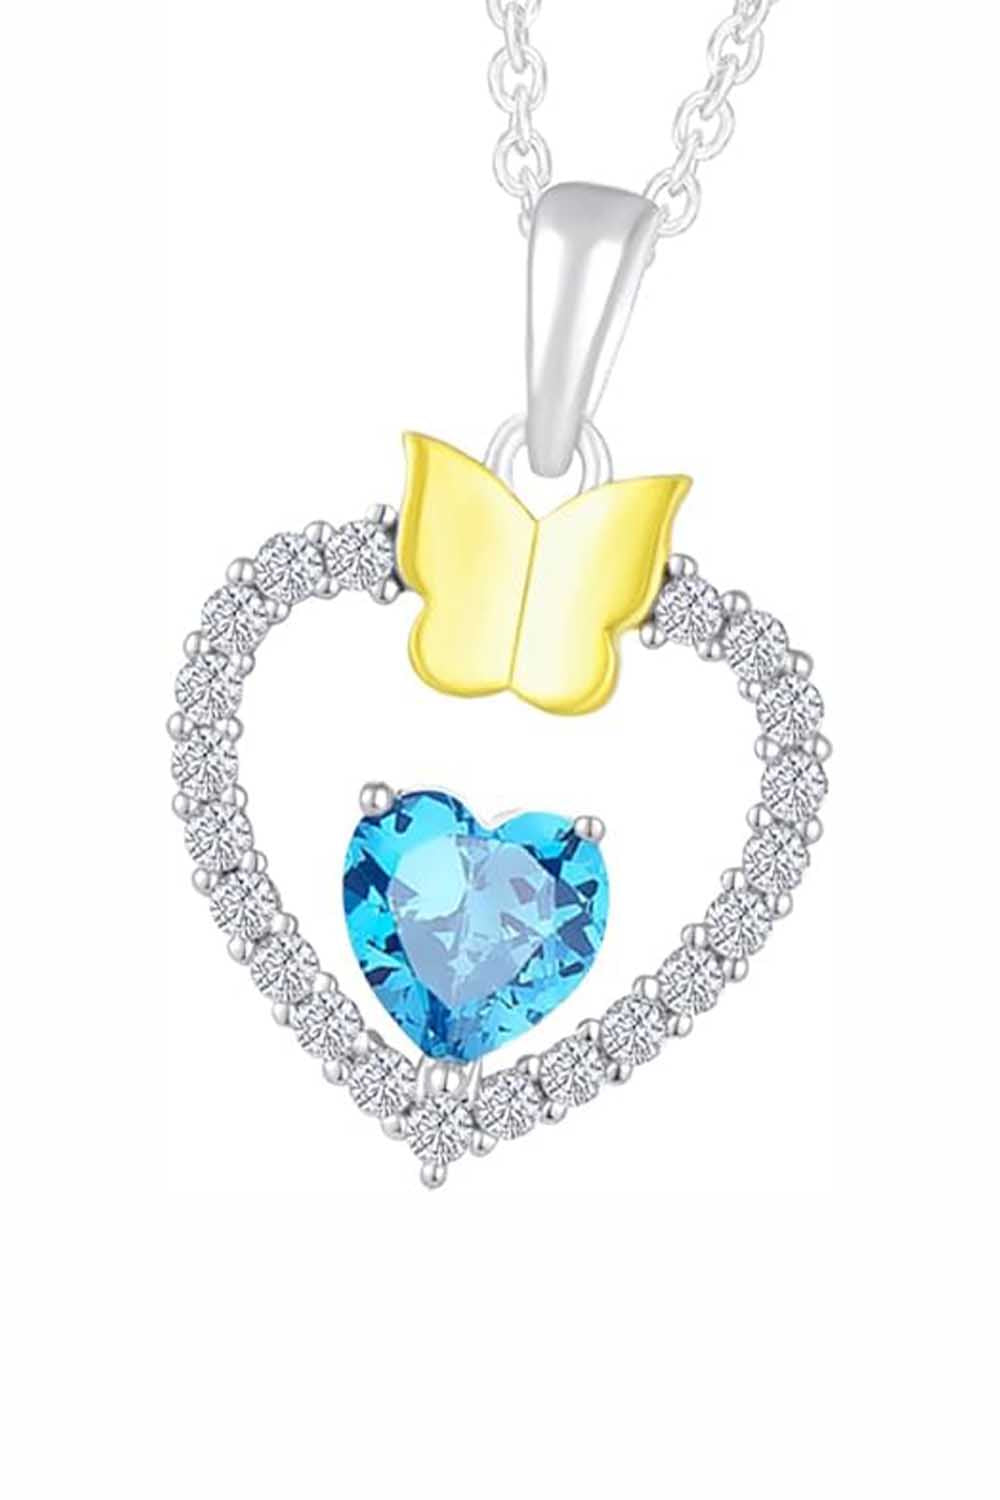 Topaz Gemstone Heart with Butterfly Pendant Necklace